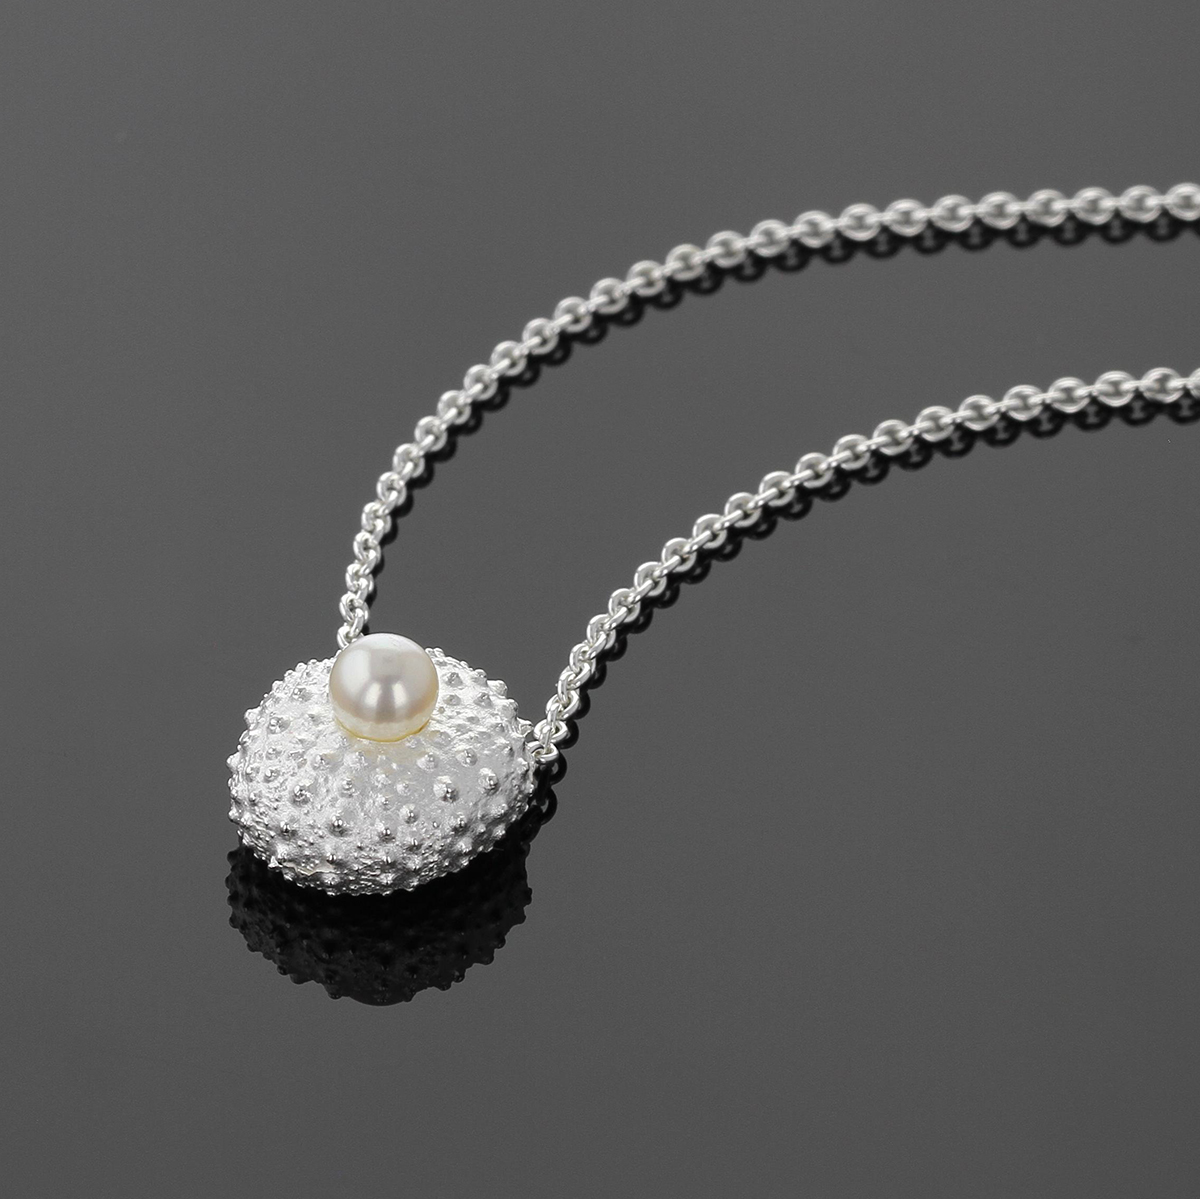 Mini sea urchin pendant in sterling silver with a freshwater pearl sitting at its center.